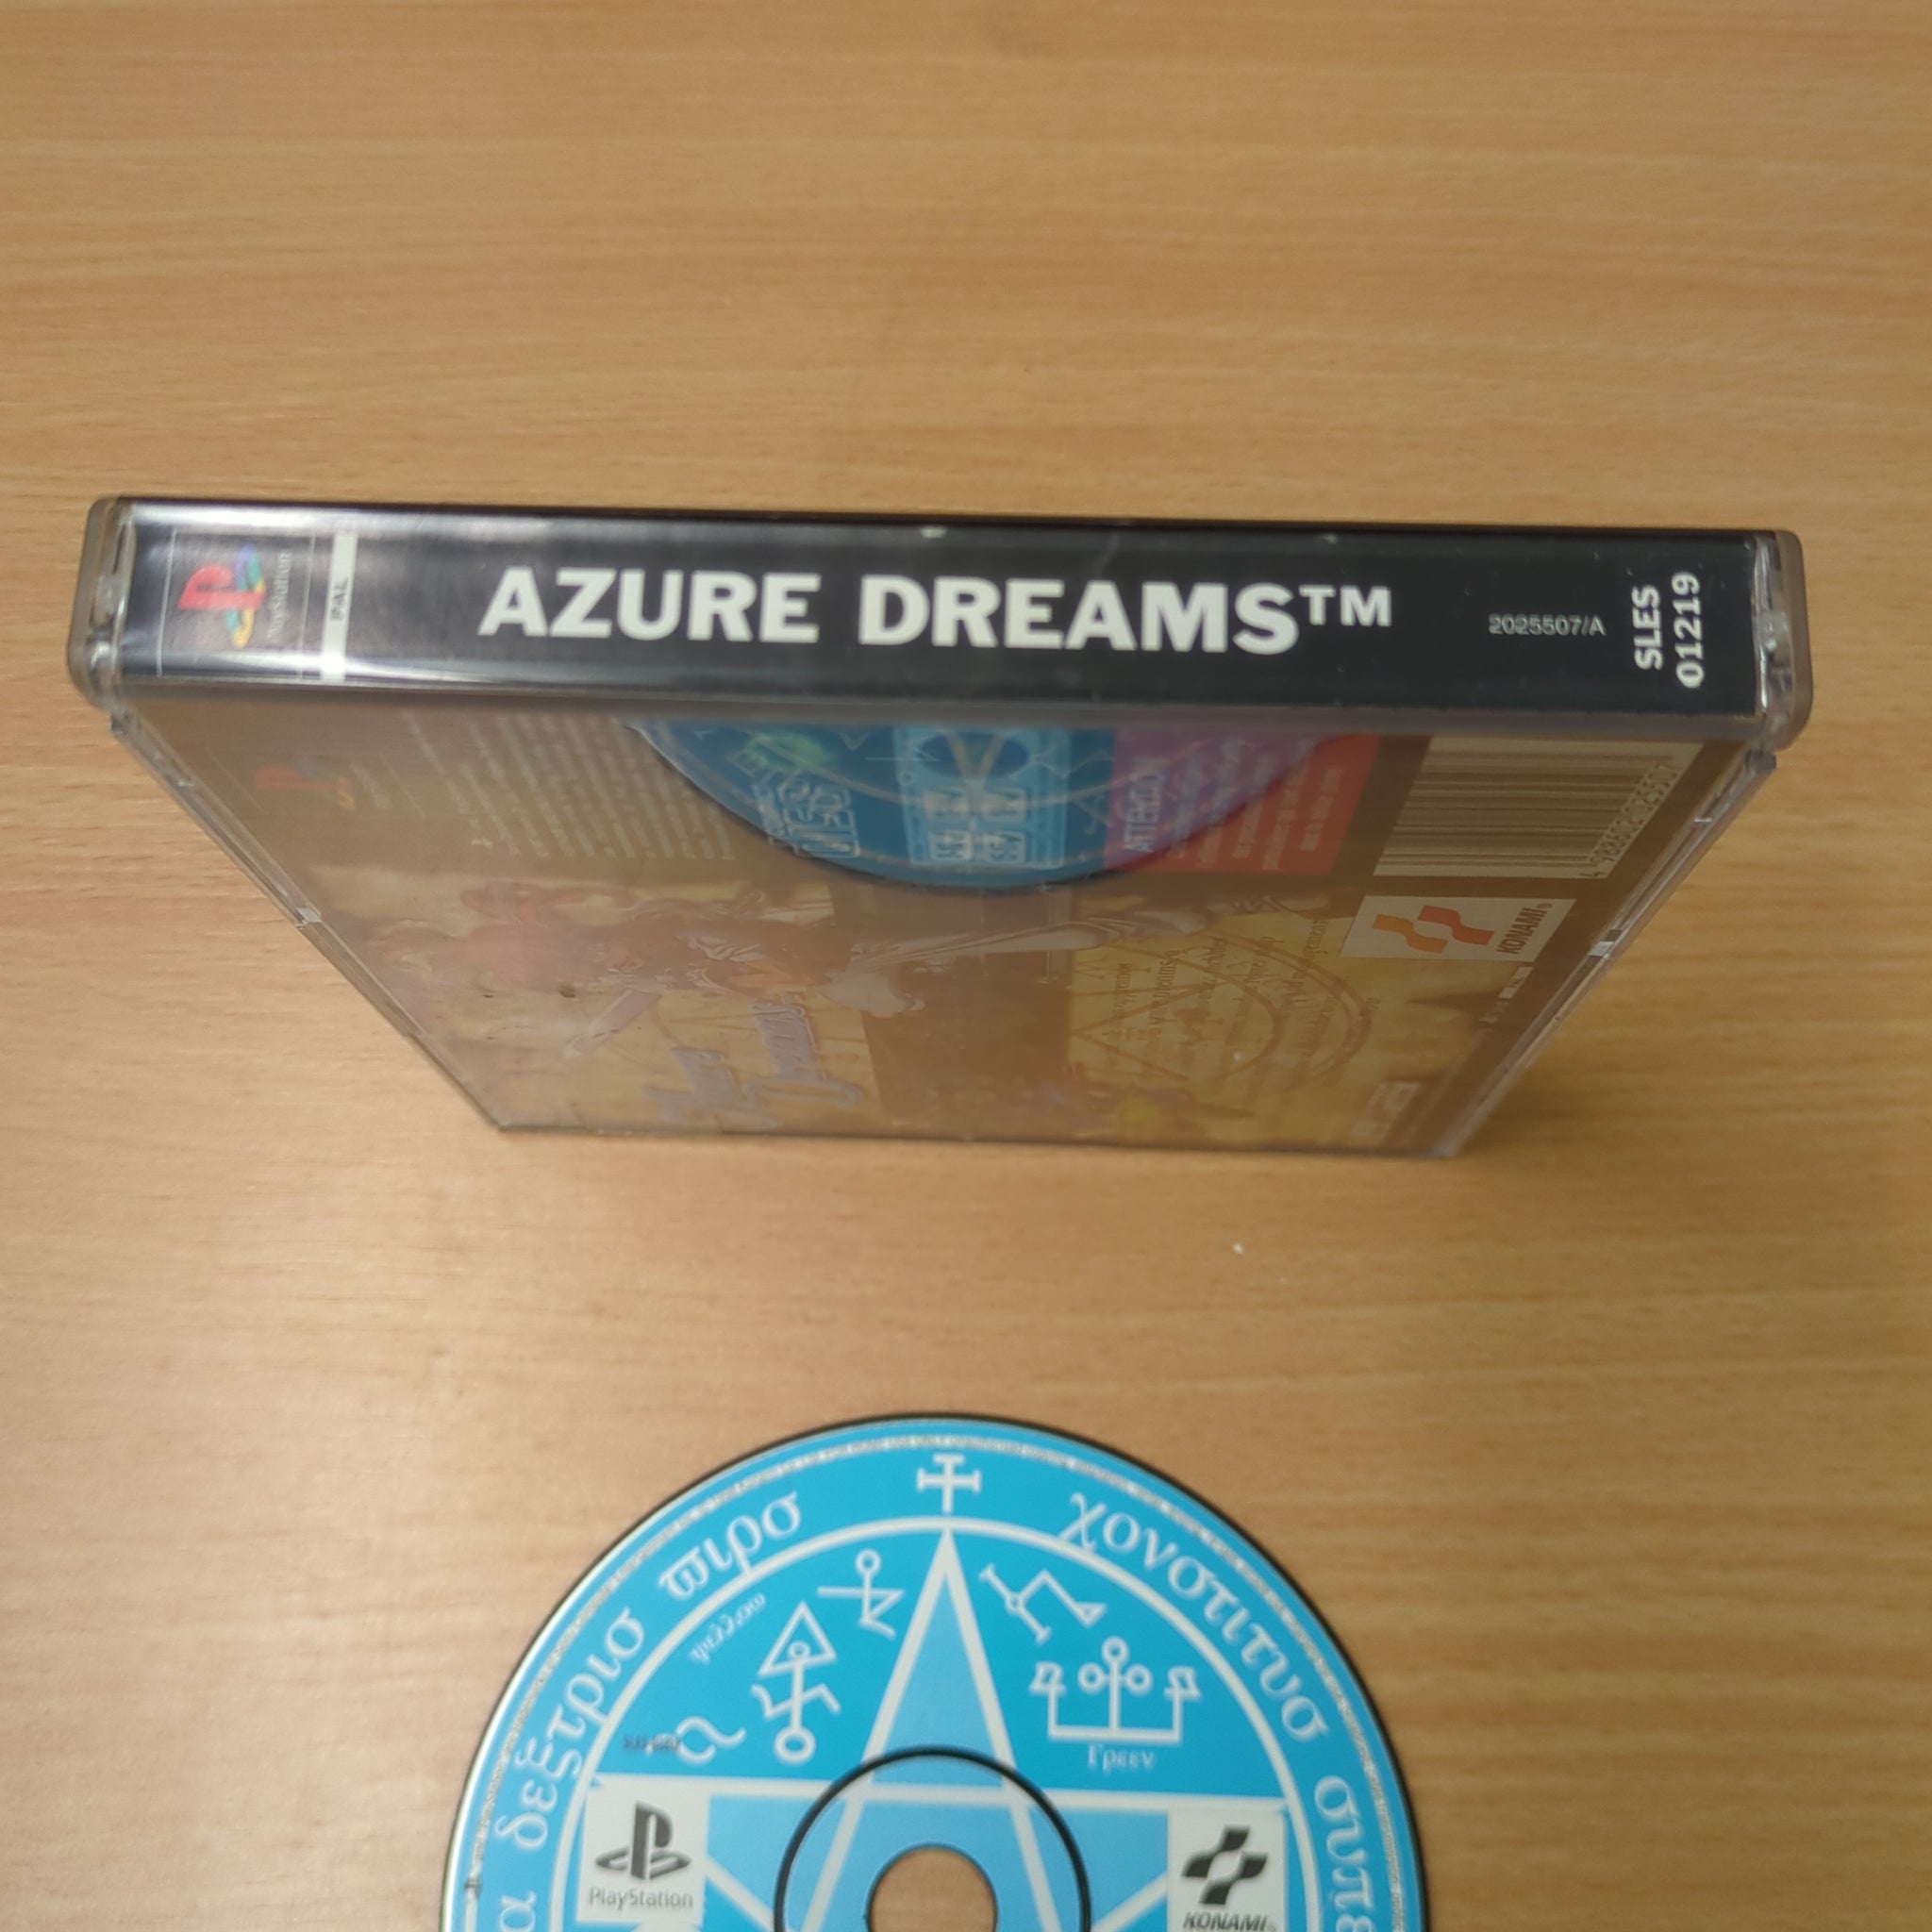 Azure Dreams Sony PS1 game